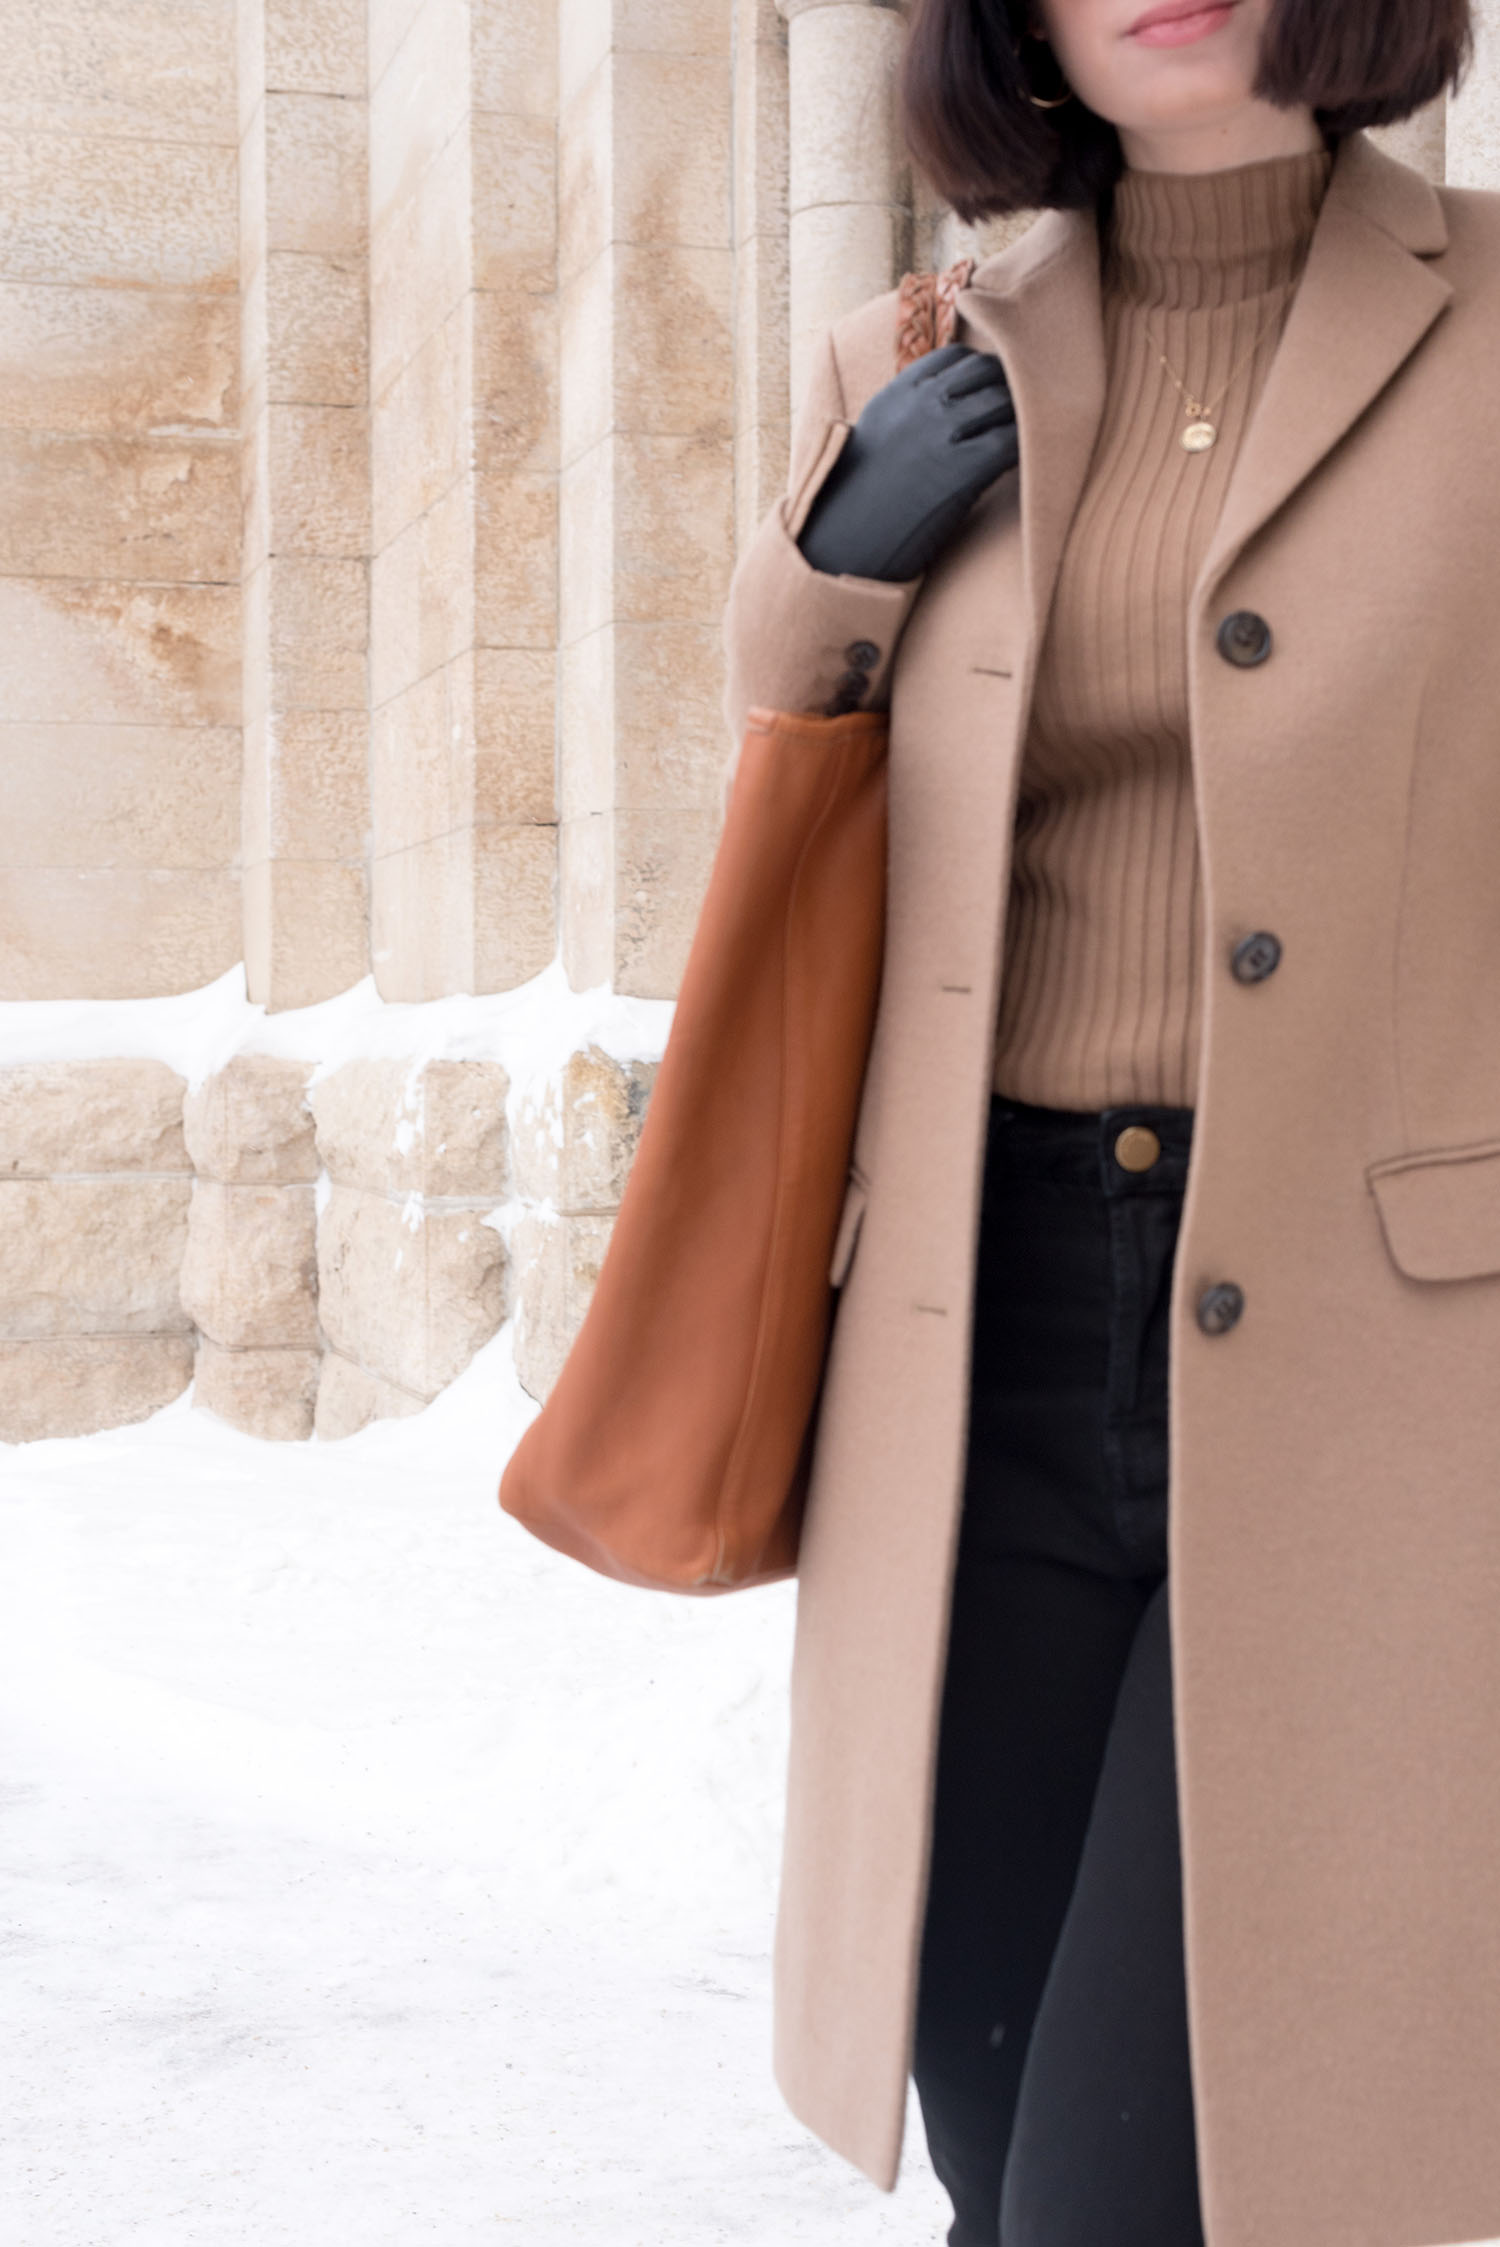 Outfit details on top Winnipeg fashion blogger Cee Fardoe of Coco & Vera, including a Les Composantes tote and Uniqlo camel coat